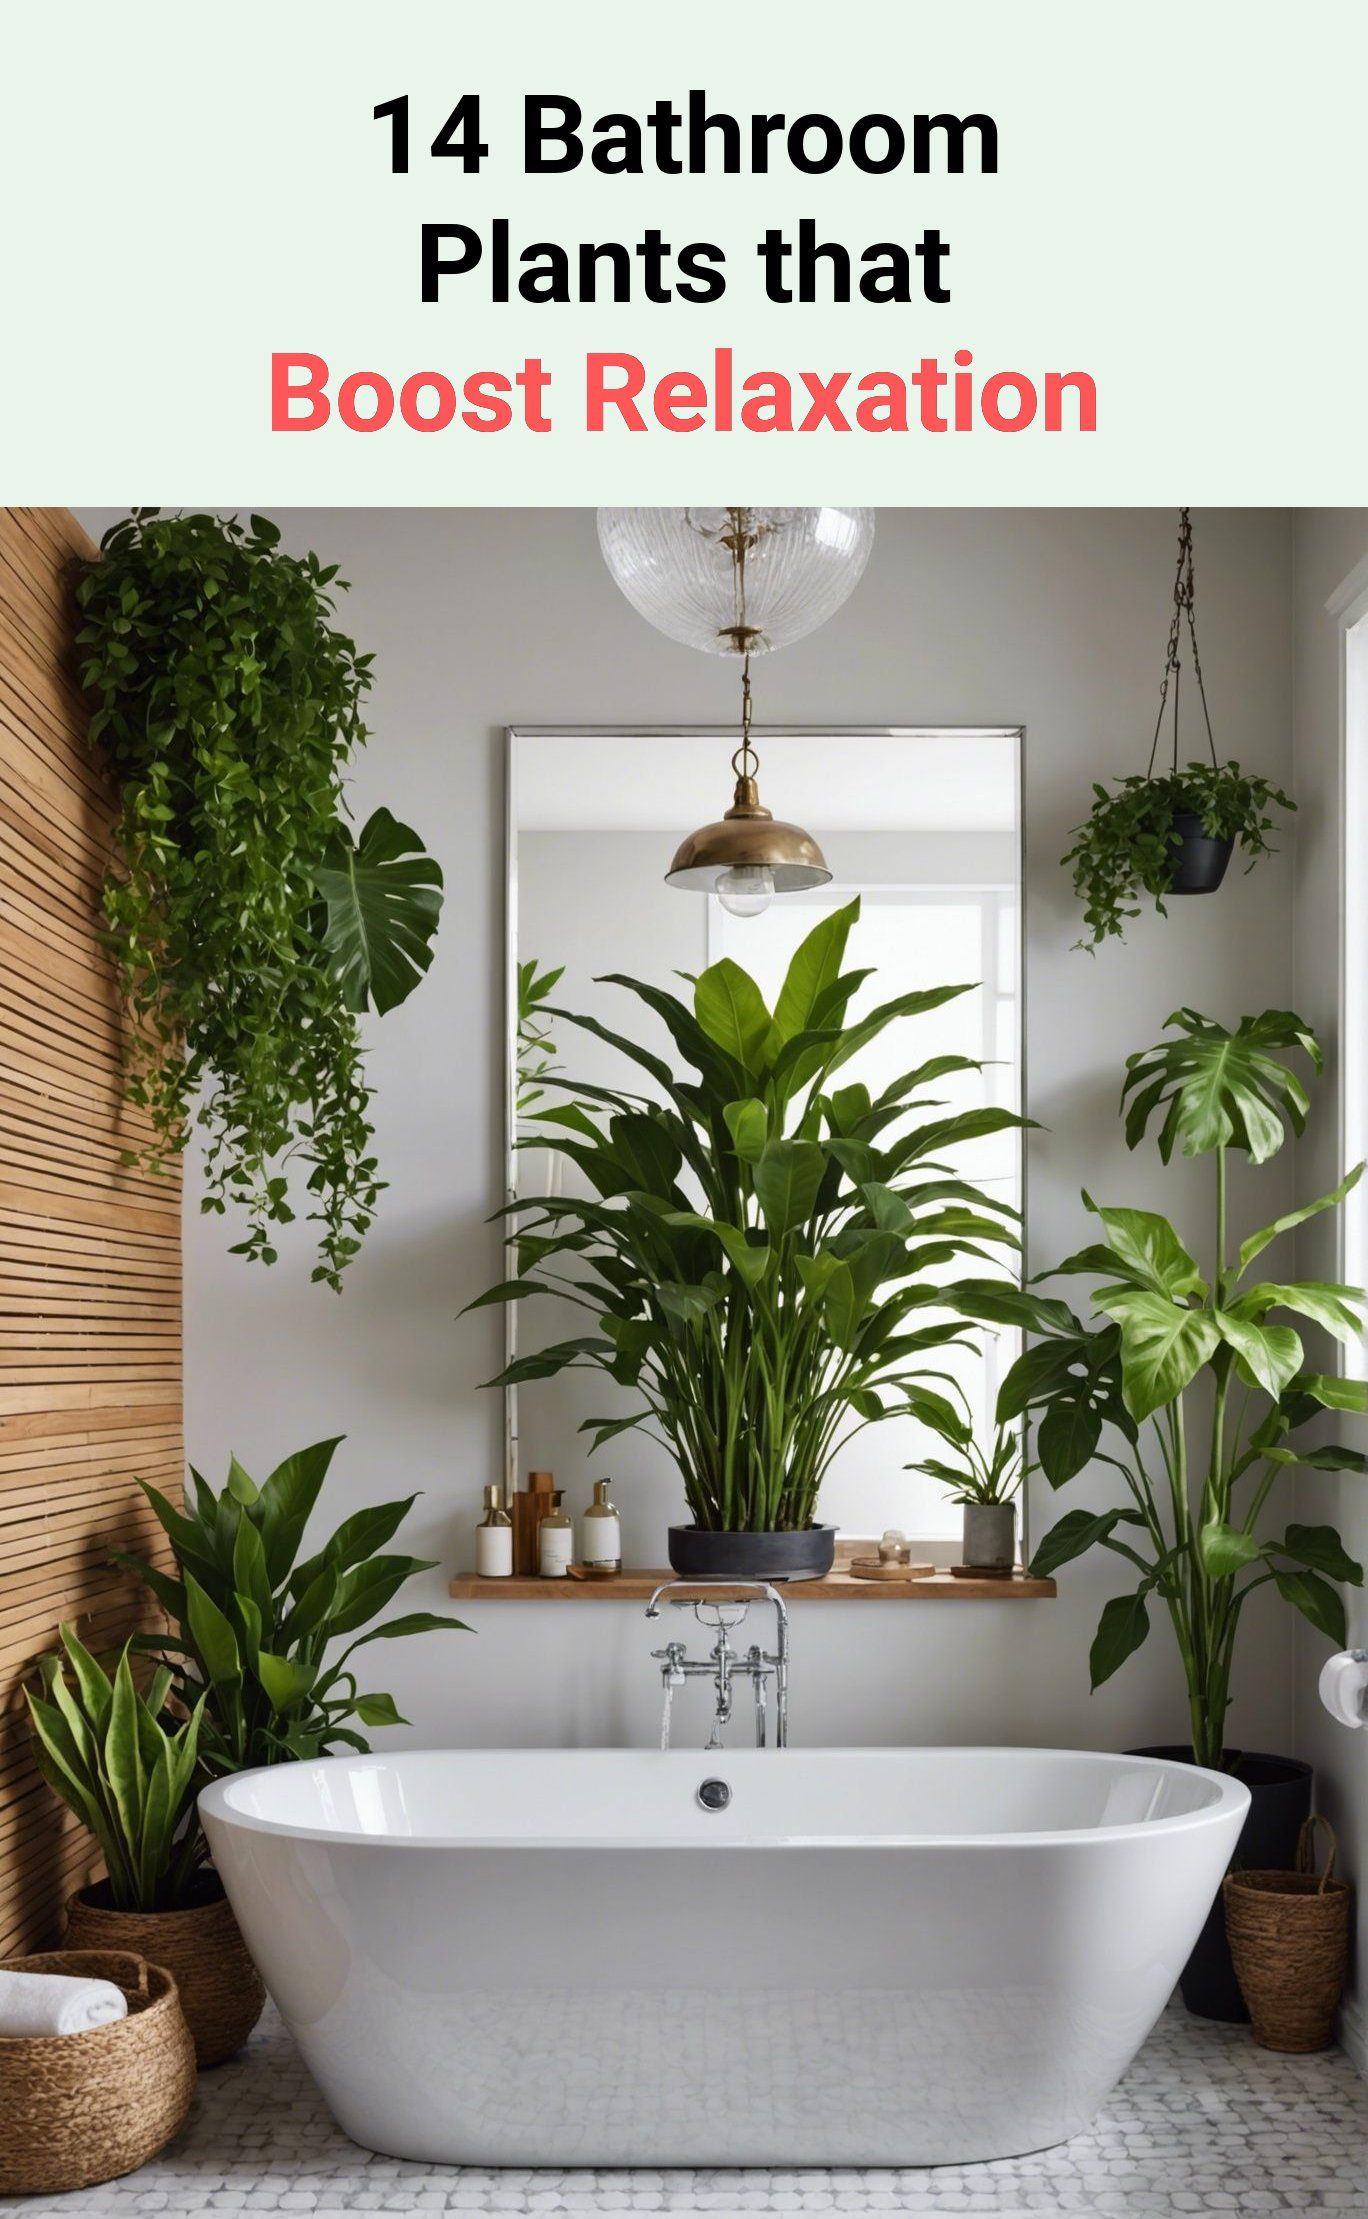 14 Bathroom Plants that Boost Relaxation